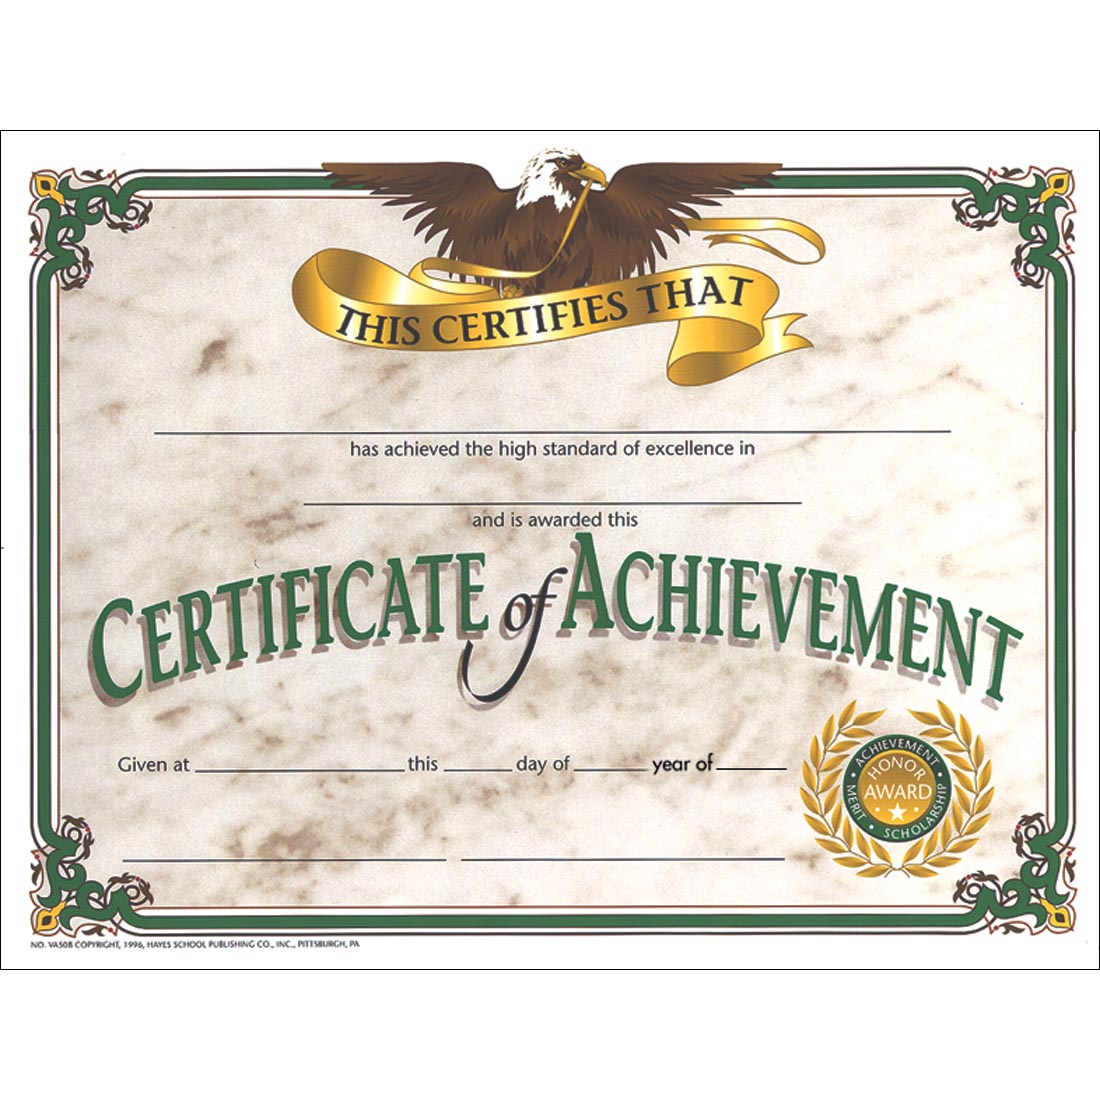 Certificate Of Achievement shows an eagle at the top